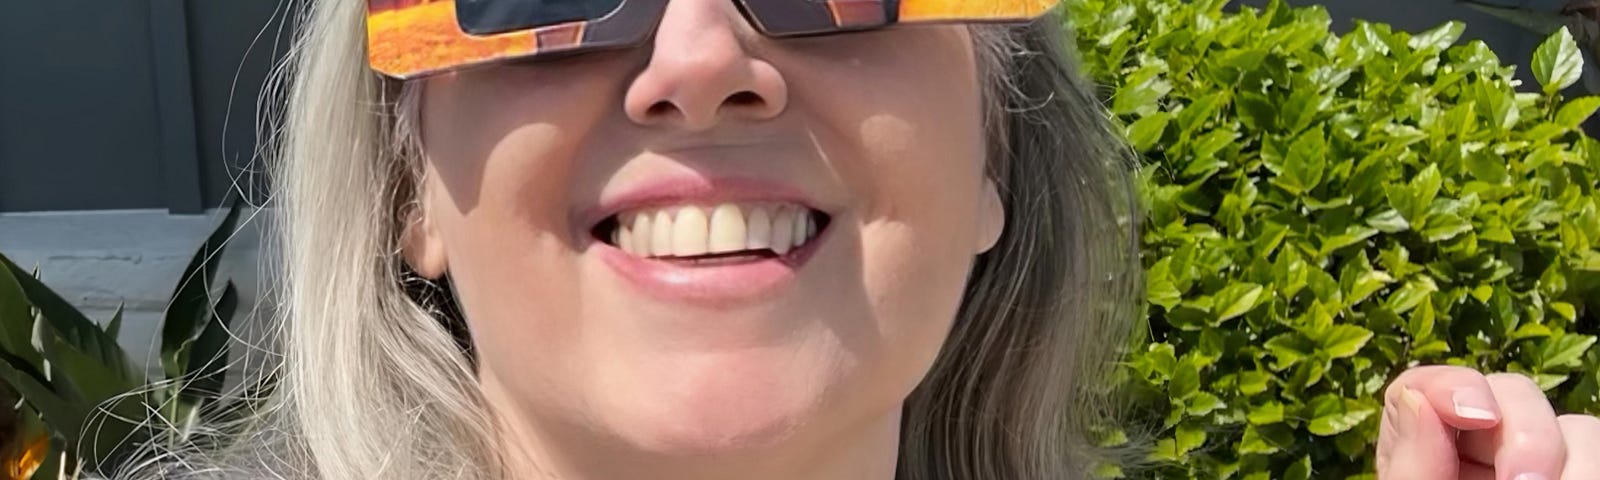 The author wearing solar eclipse glasses and looking upward smiling.